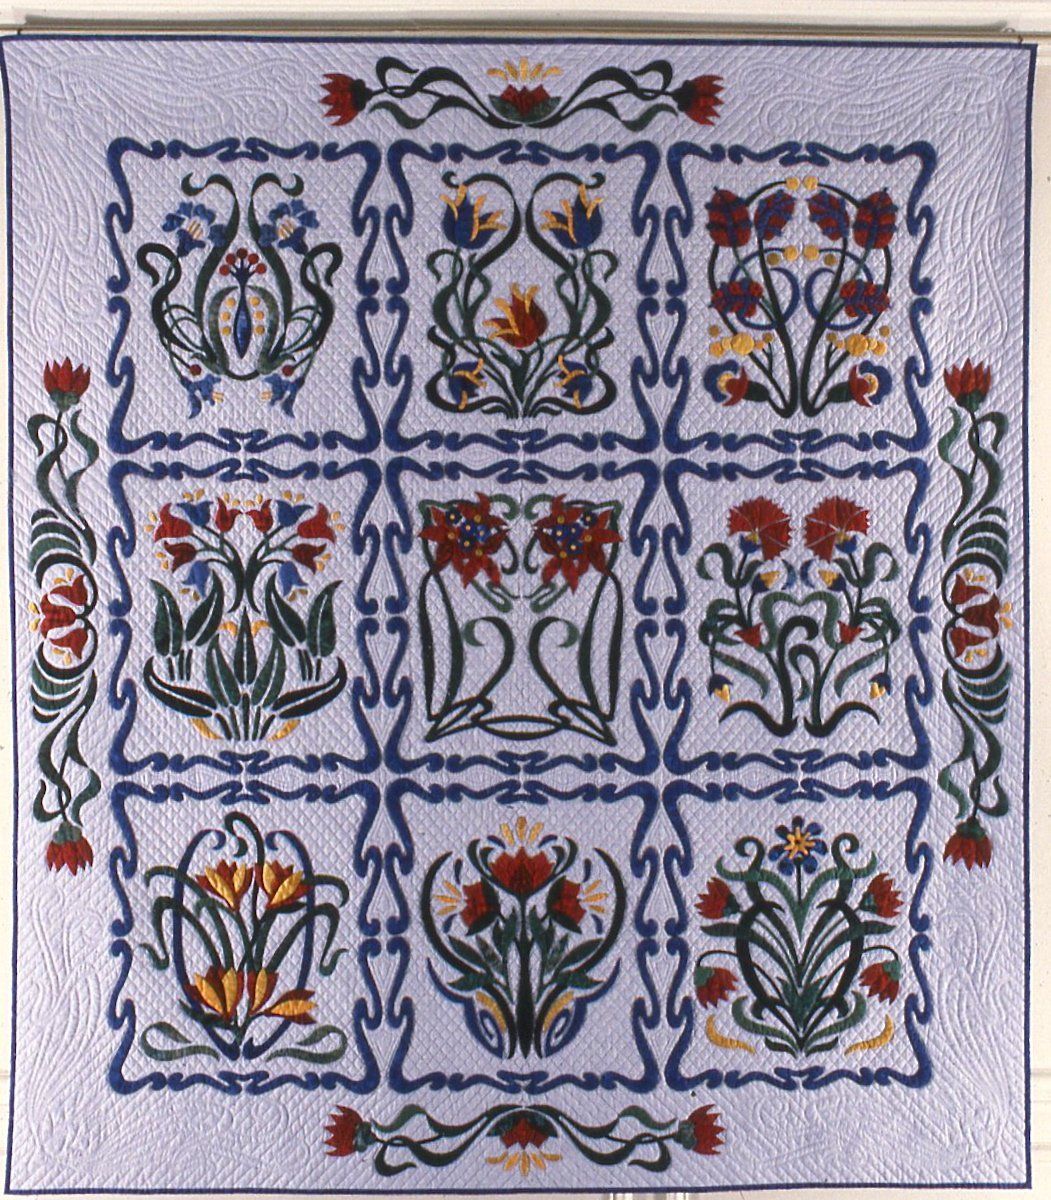 Rhapsody in Bloom Pattern, Suzanne Marshall Quilt Maker